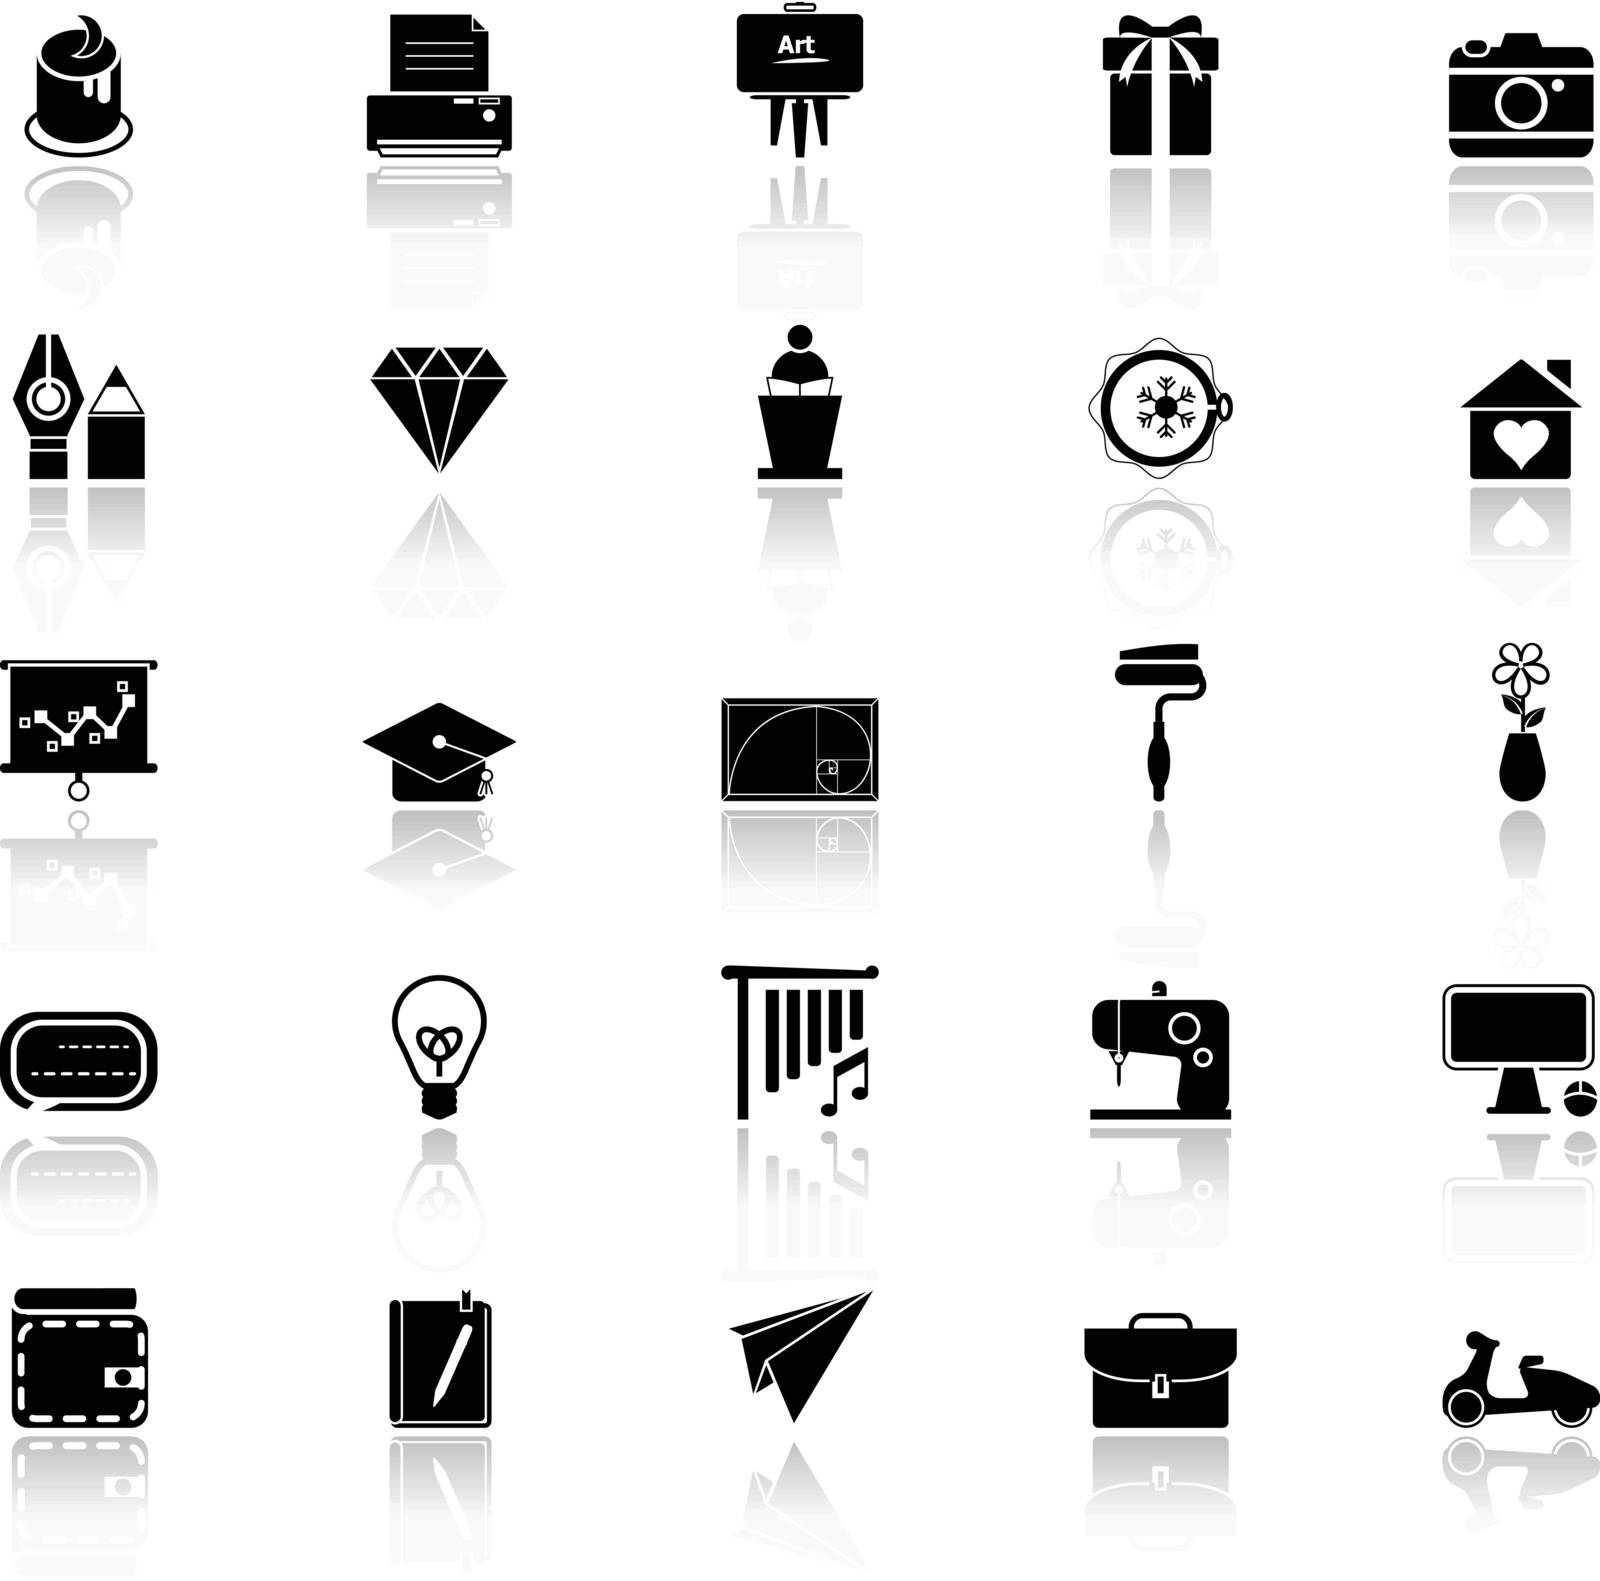 Art and creation icons with reflect on white background by nalinratphi